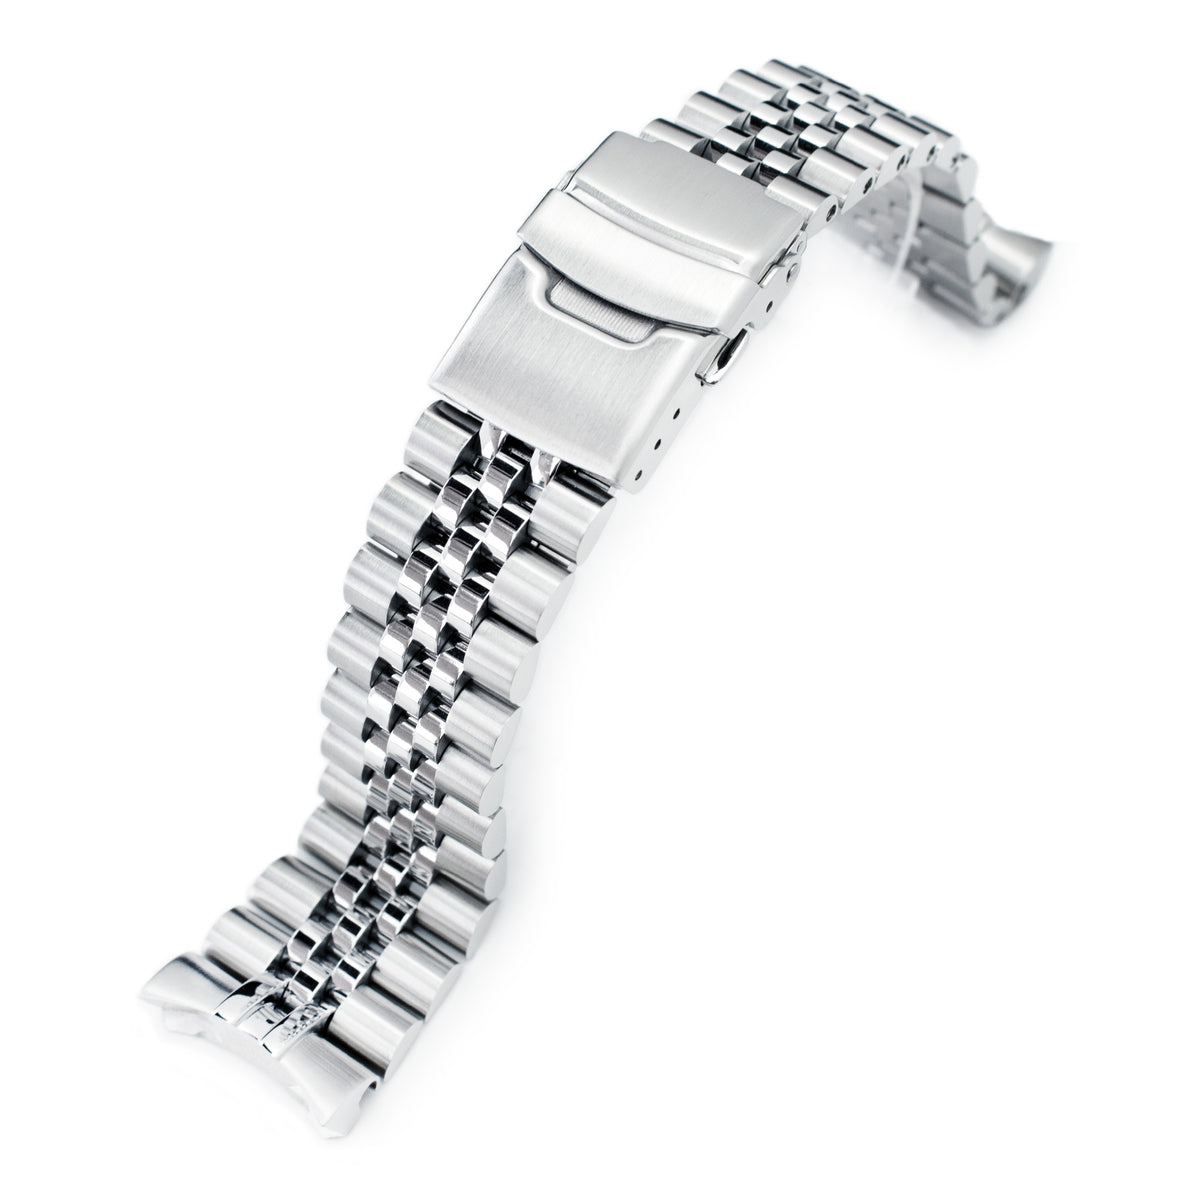 22mm Super-J Louis JUB Watch Band compatible with Seiko SKX007, 316L Stainless Steel Brushed